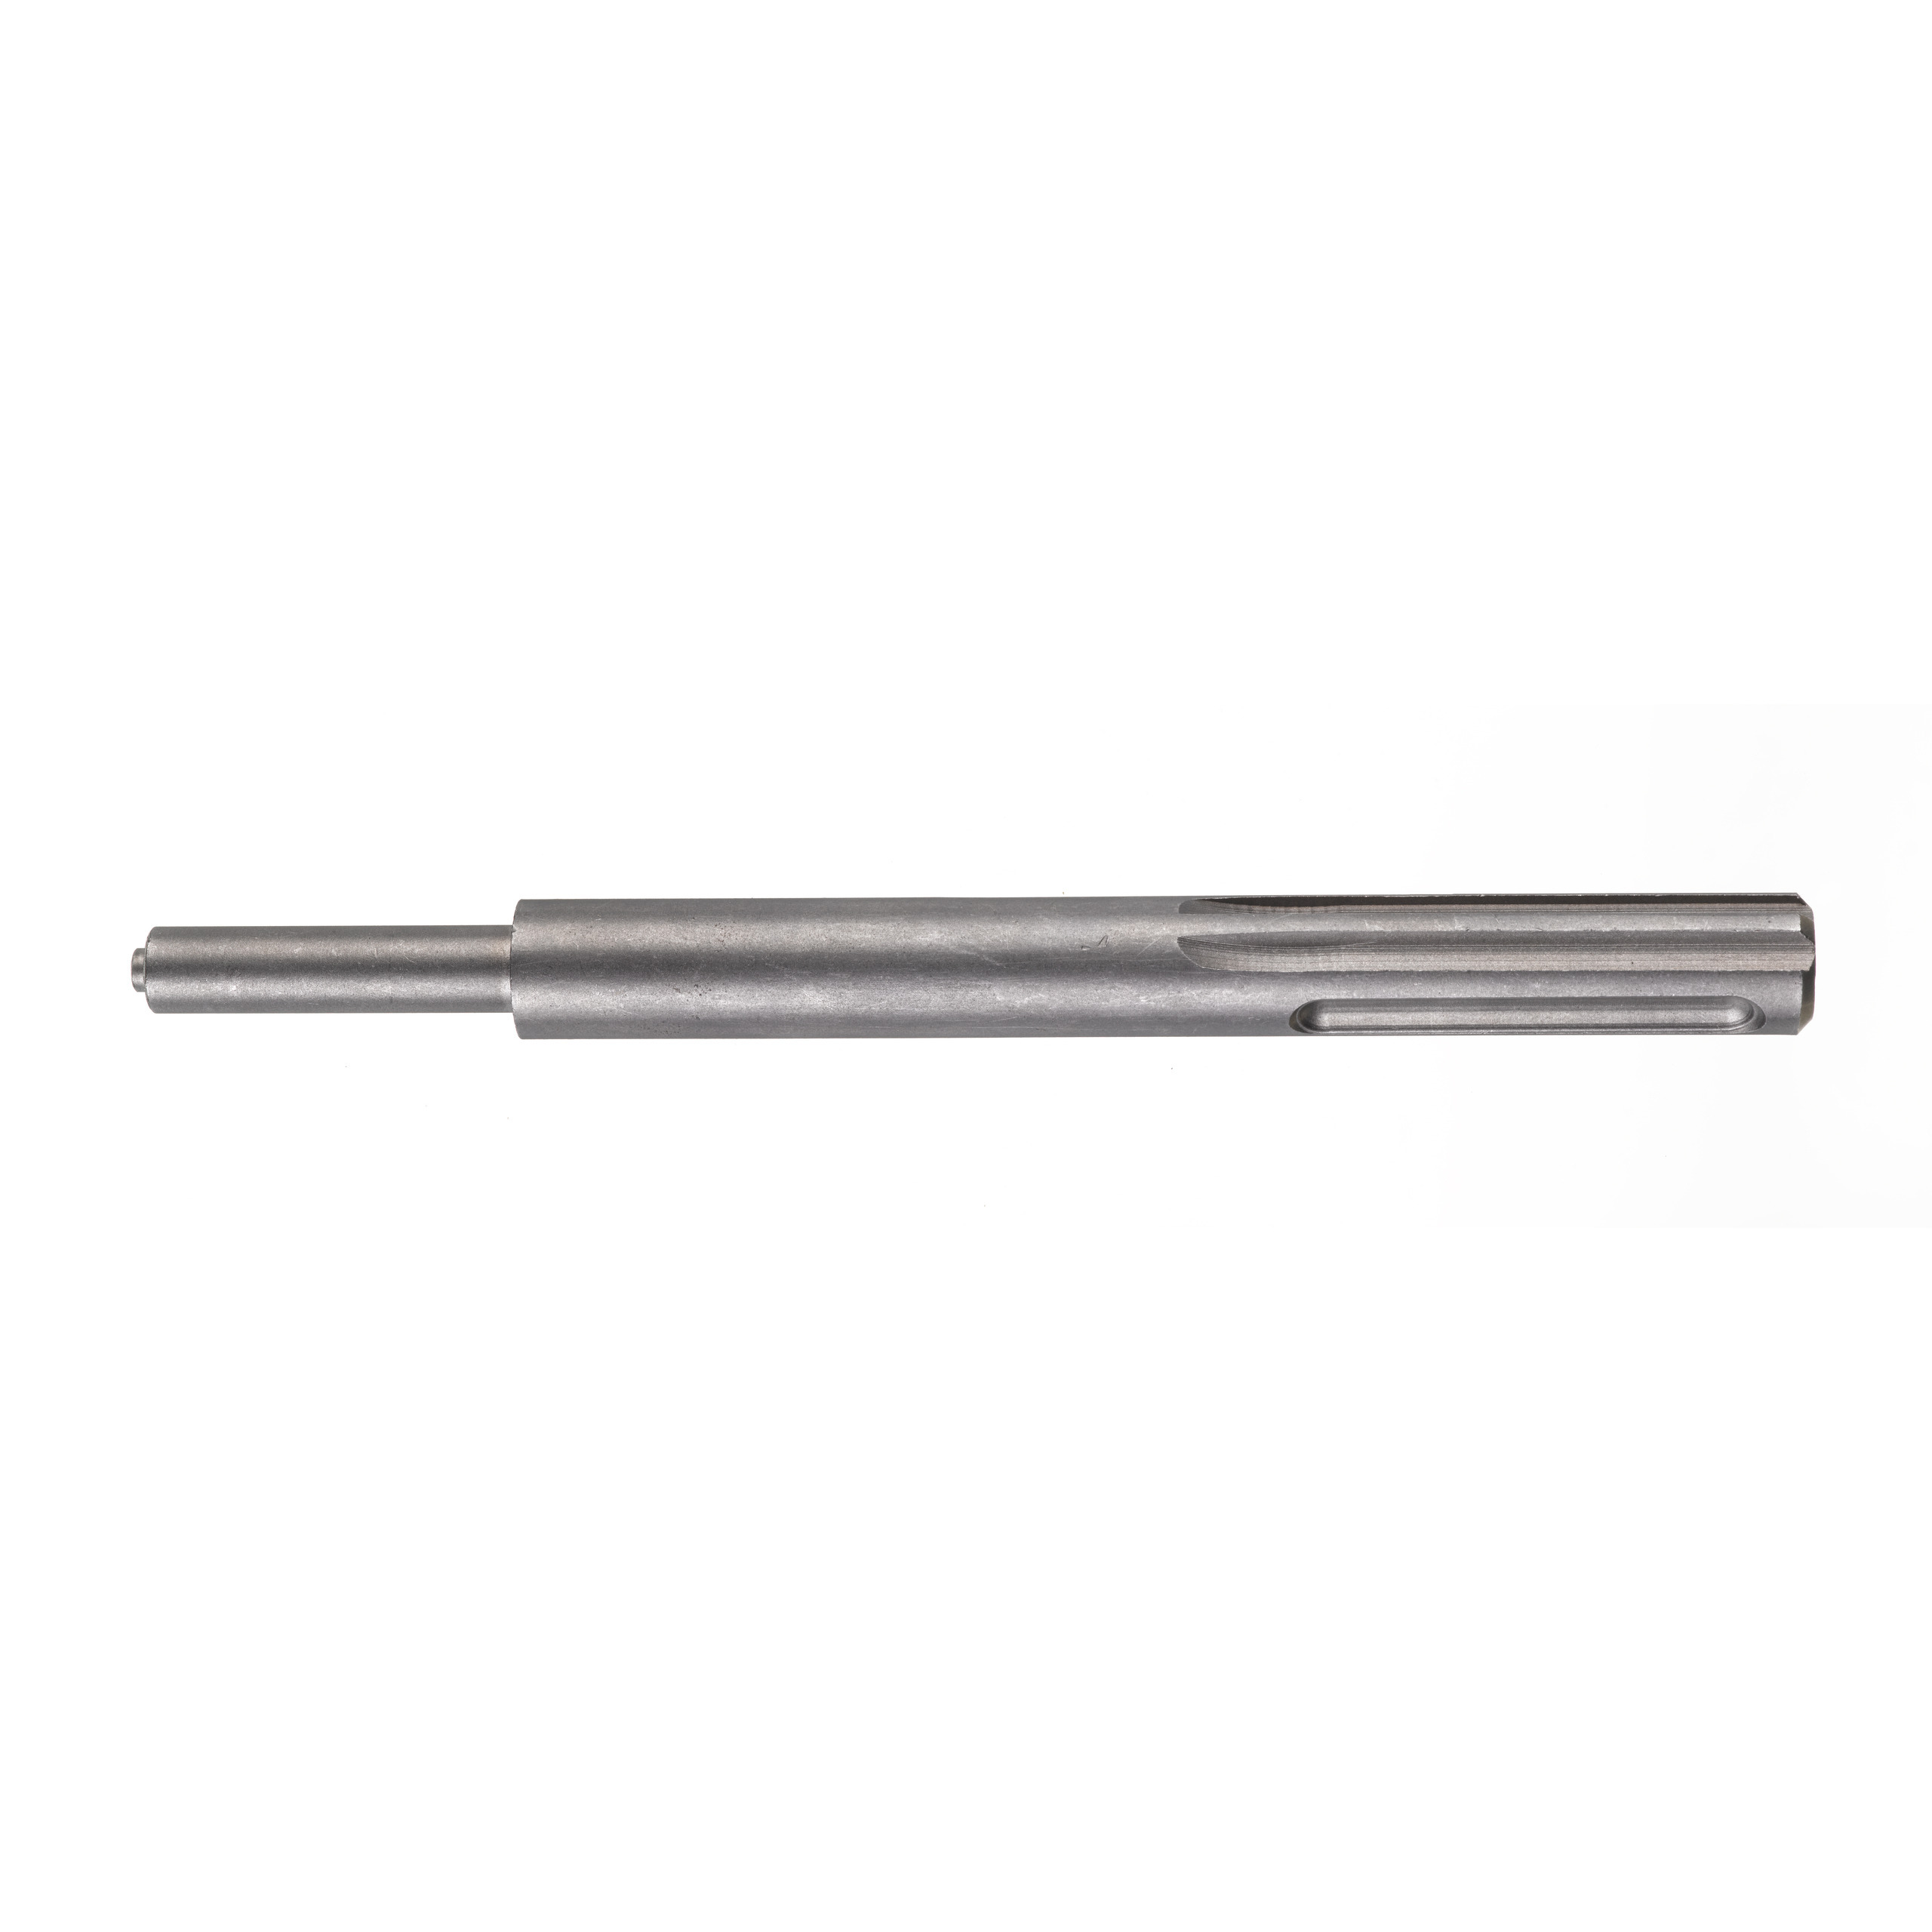 Core Bit Tooth Removal - 1pc MILWAUKEE ACCESSOIRES - 4932464298